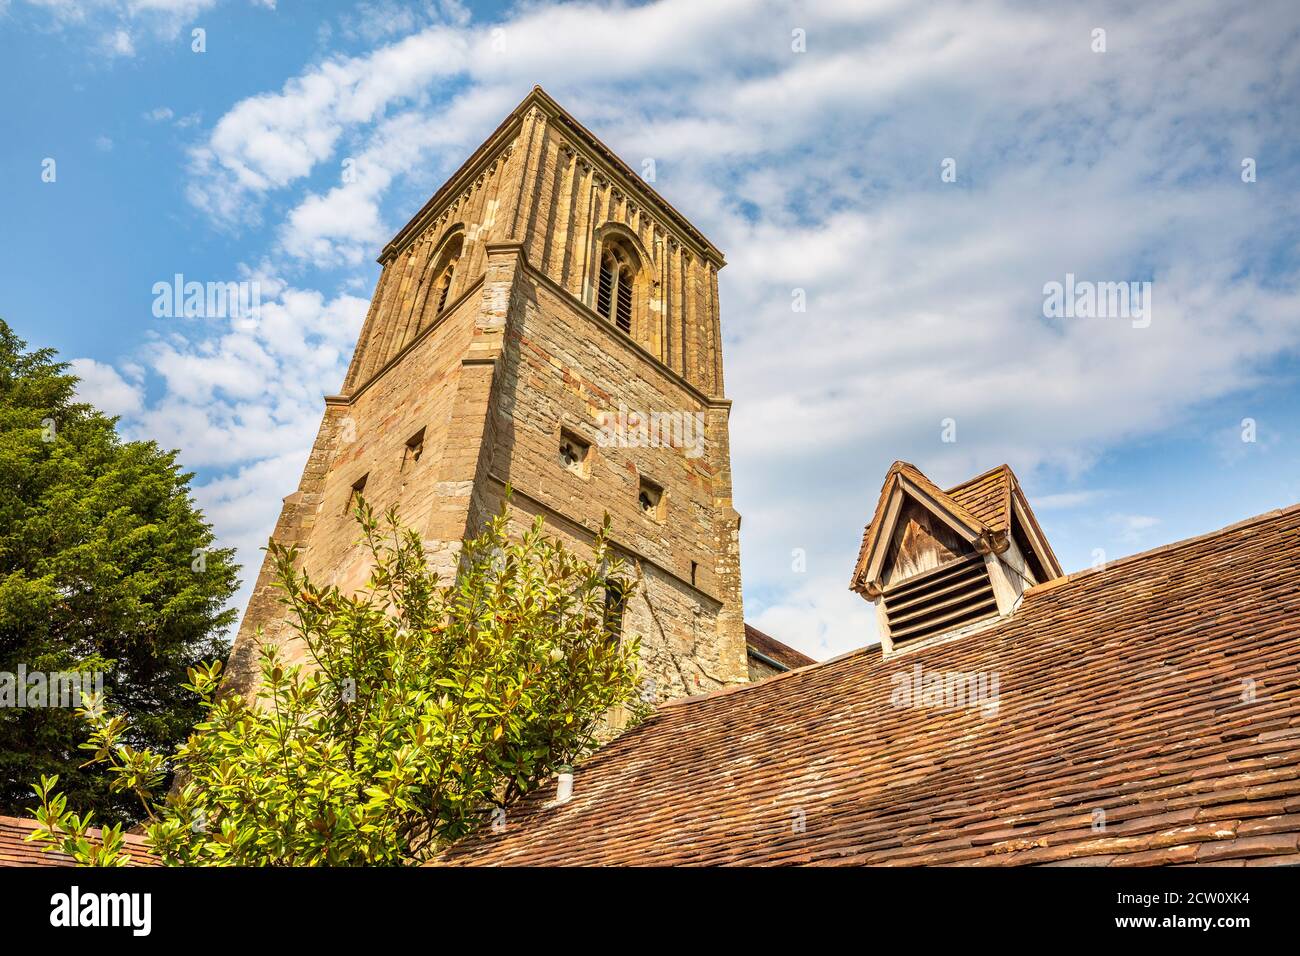 The 12th-century Little Malvern Priory in the Malvern Hills, Worcestershire, England Stock Photo